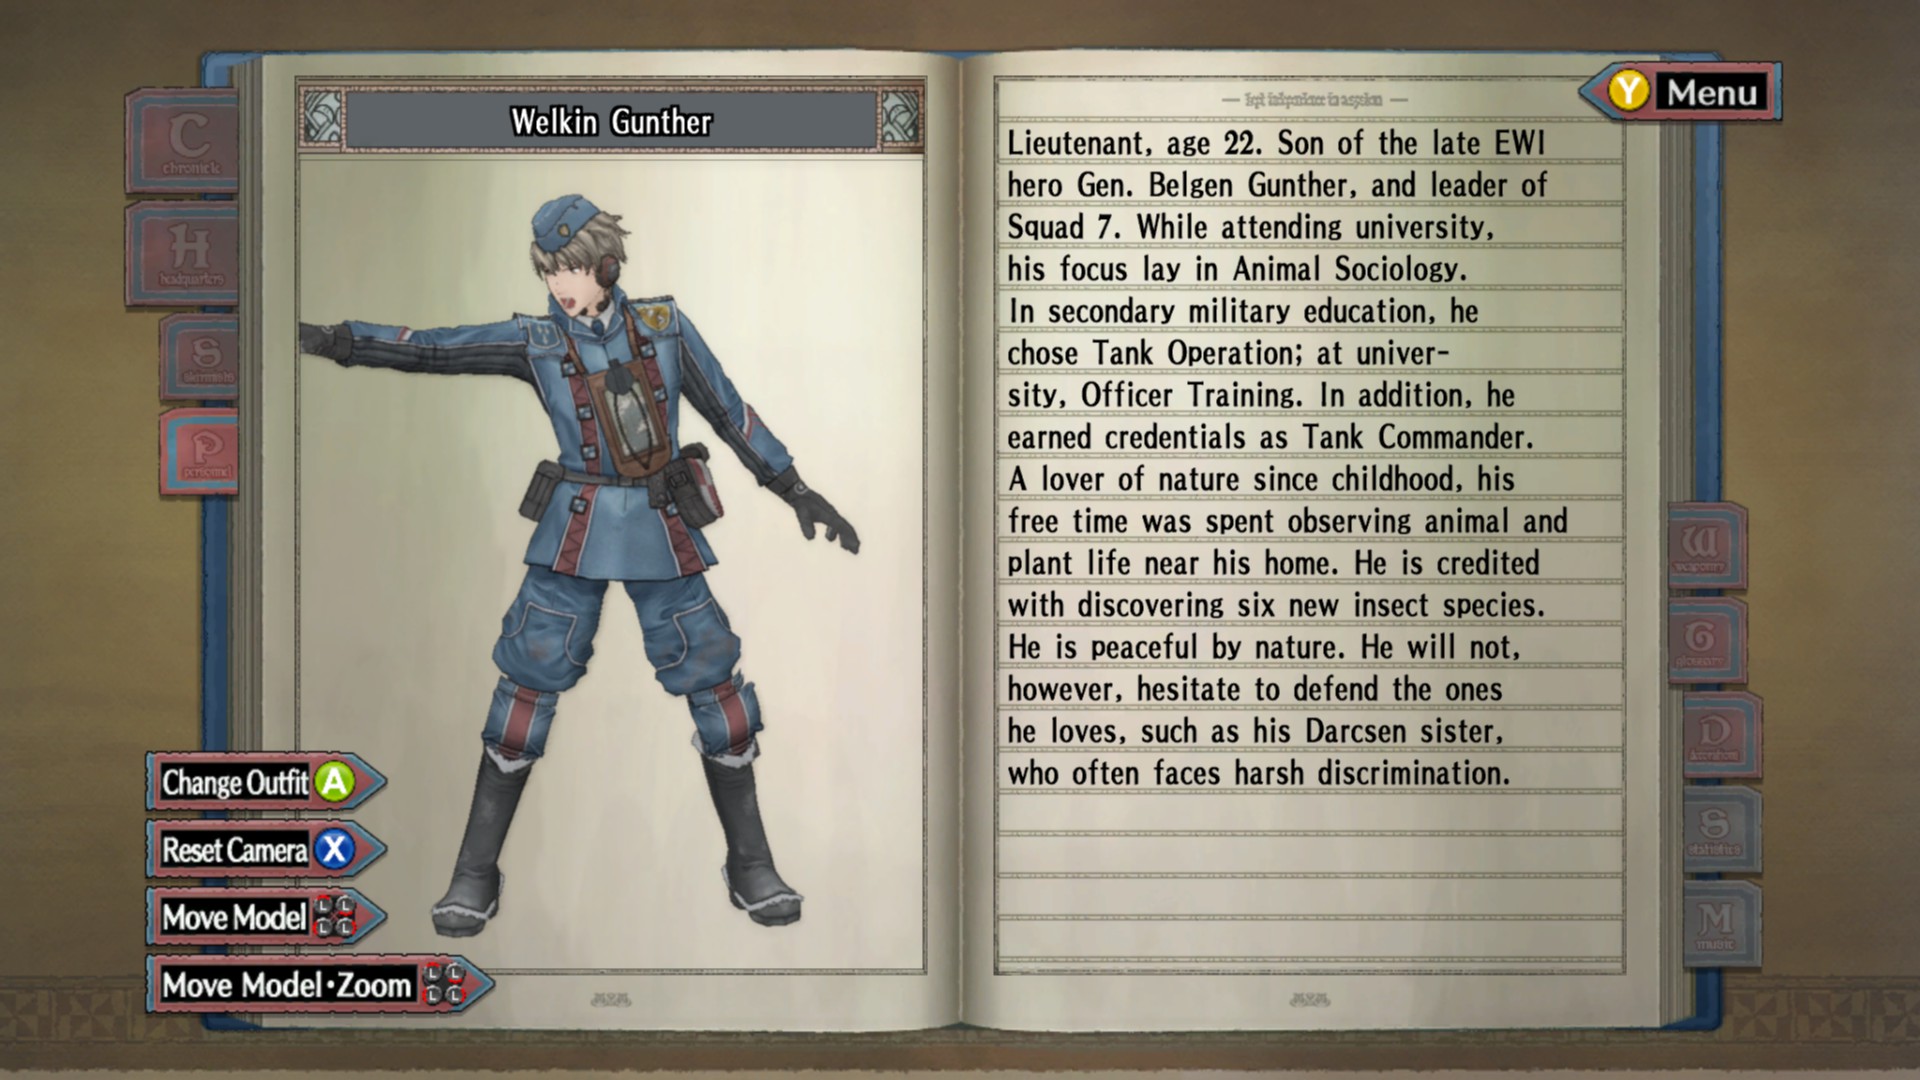 The story of Valkyria Chronicles told through a book